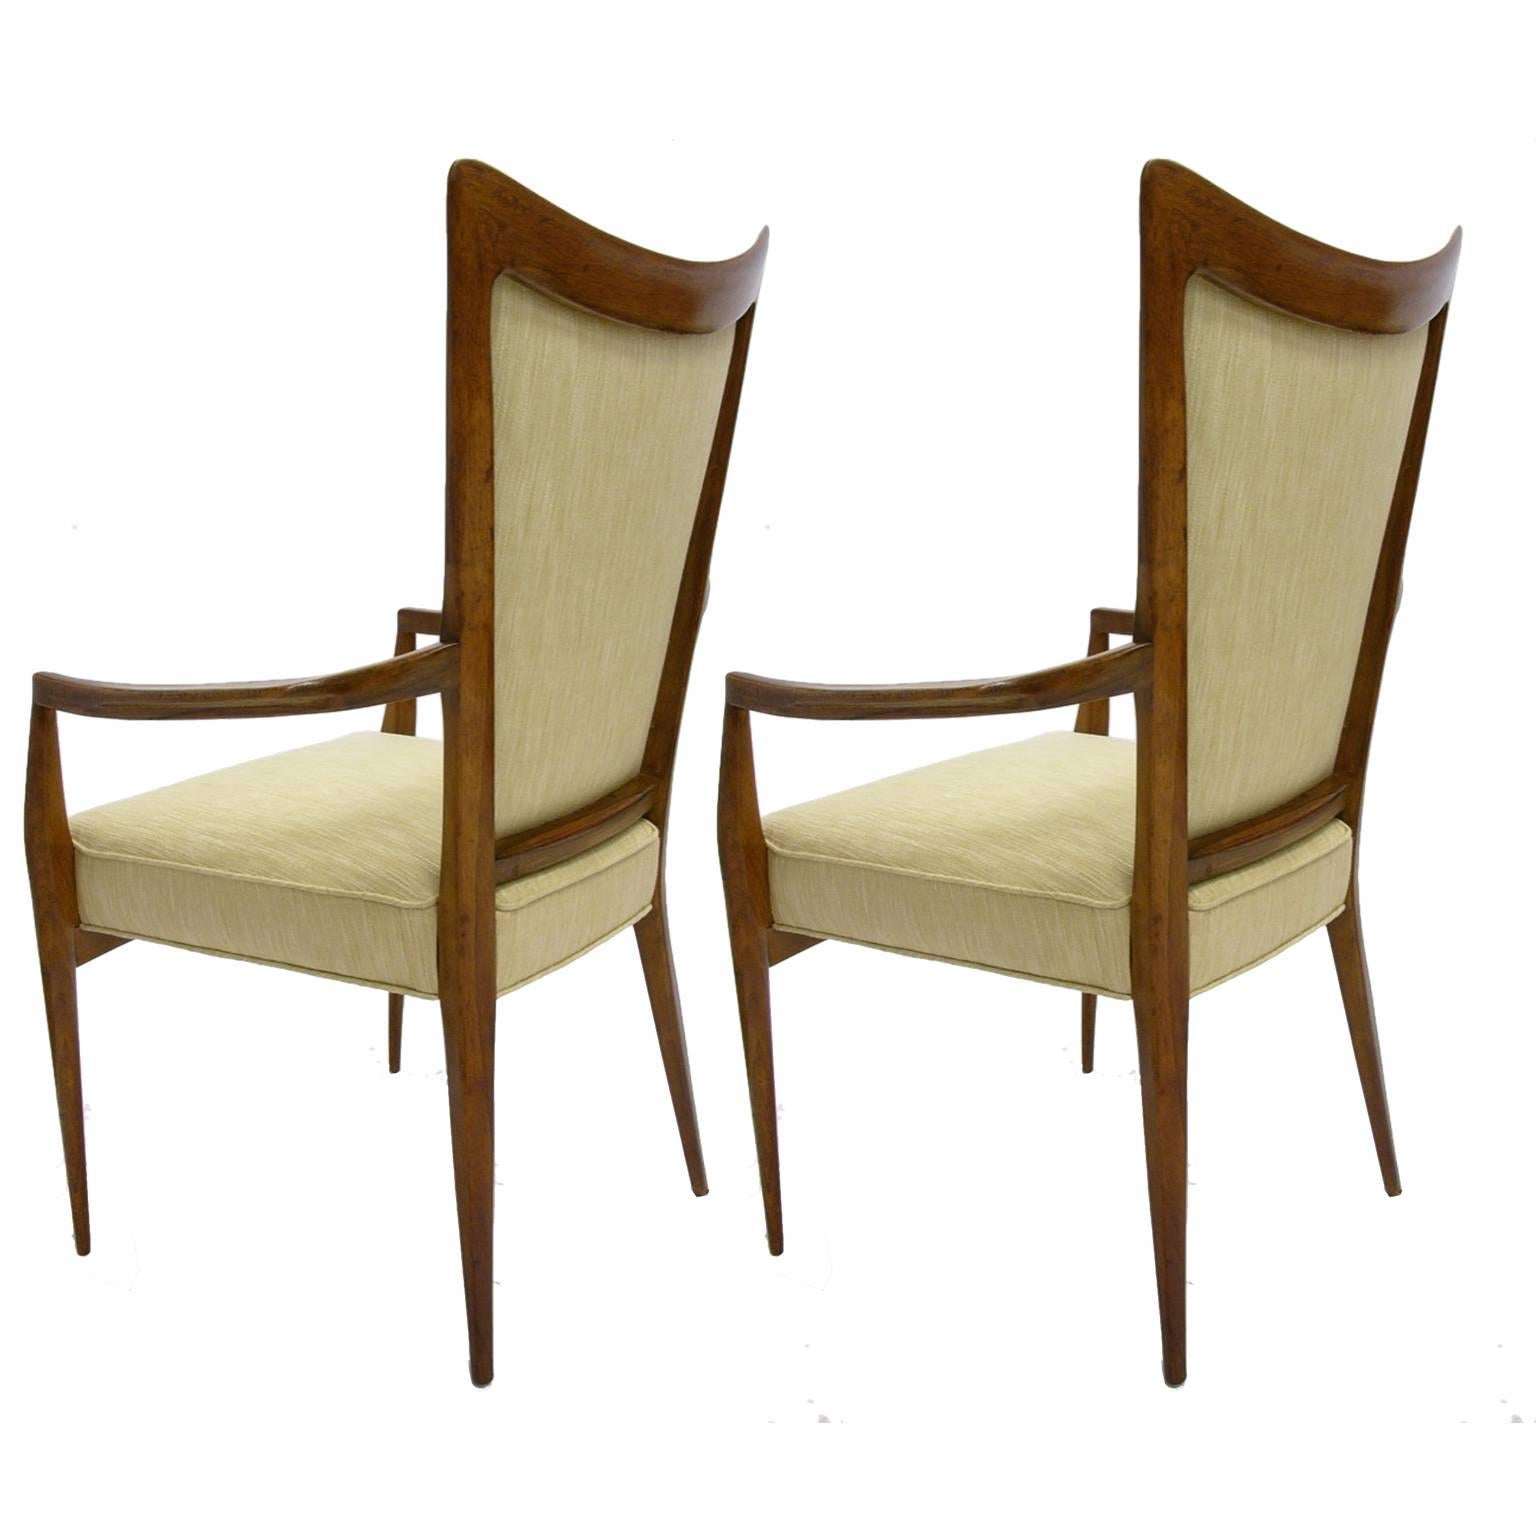 These chairs have just been upholstered with a beautiful, sturdy textured silk upholstery with gorgeous double piping detail. Gorgeous, sleek design.